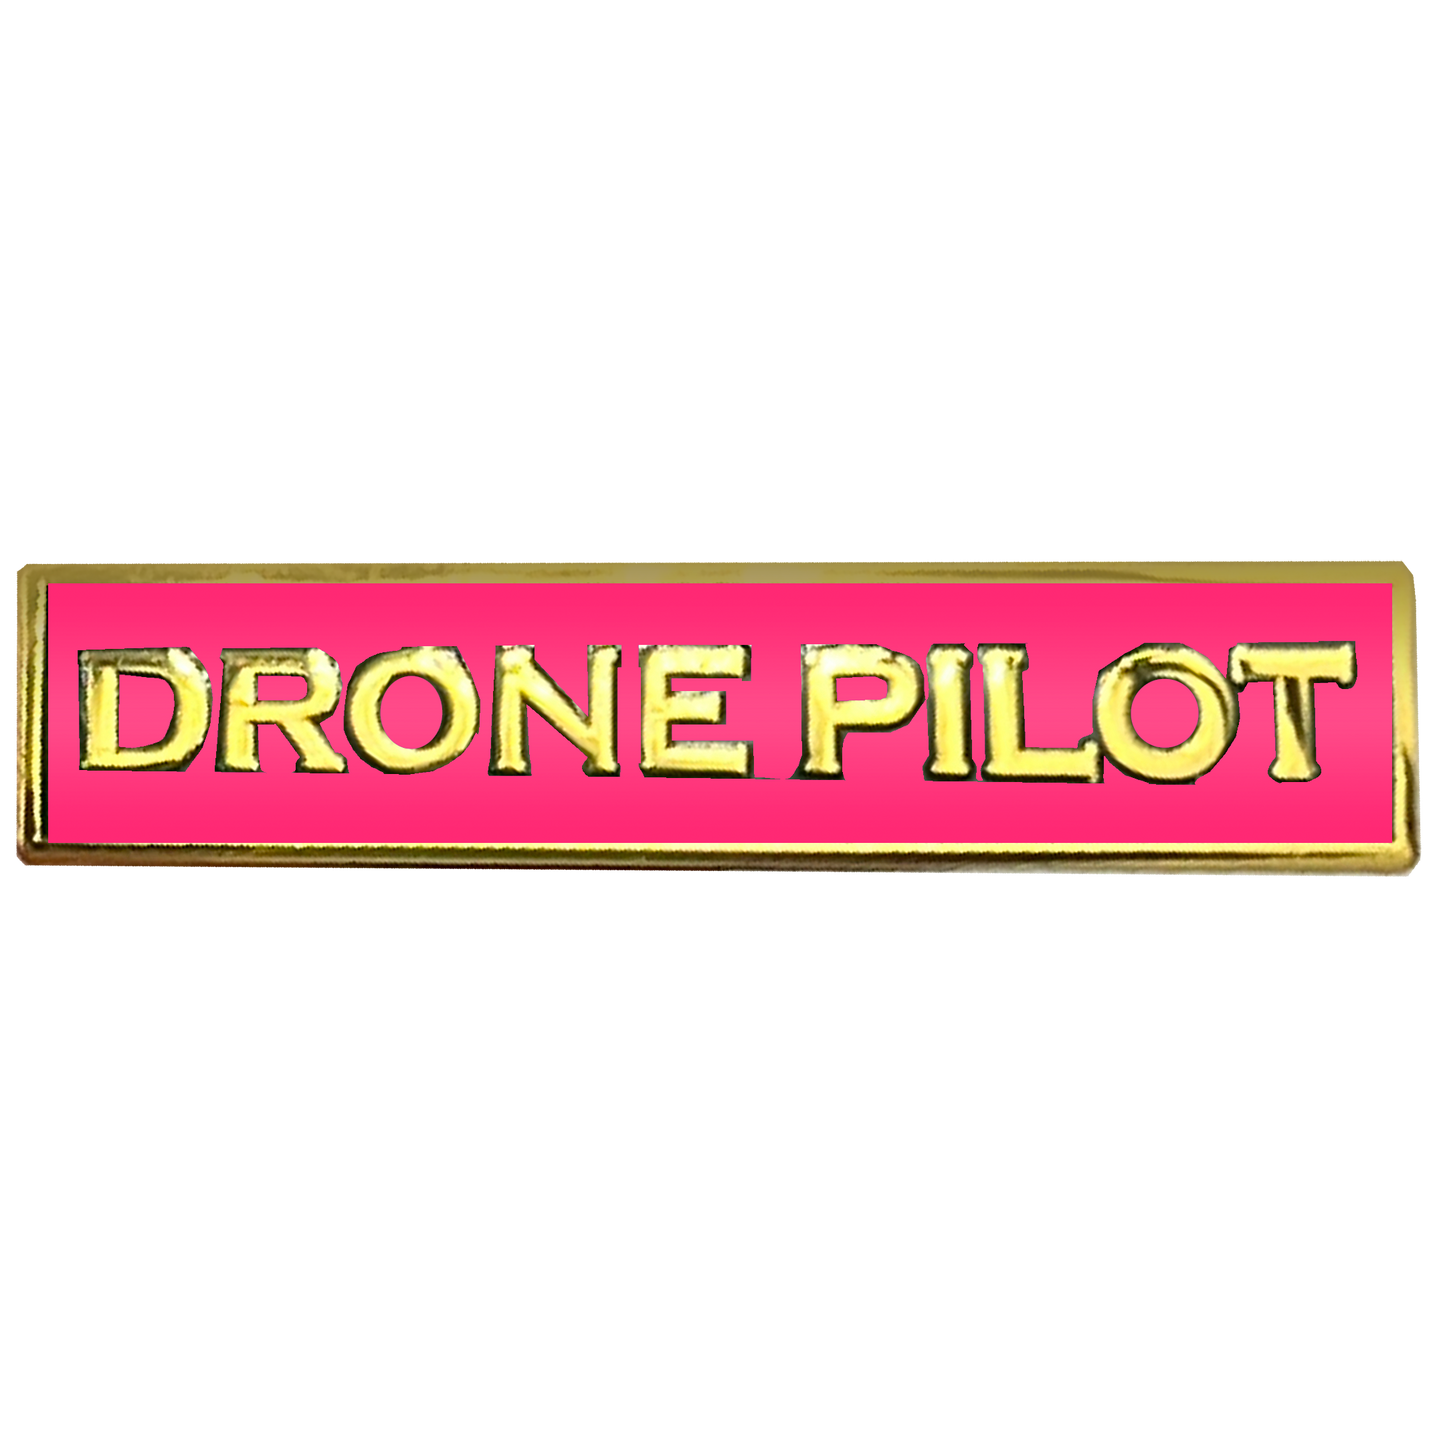 PBX-012-E Ladies DRONE PILOT Pink Commendation Bar Pin Police Government Realtor Commercial FAA